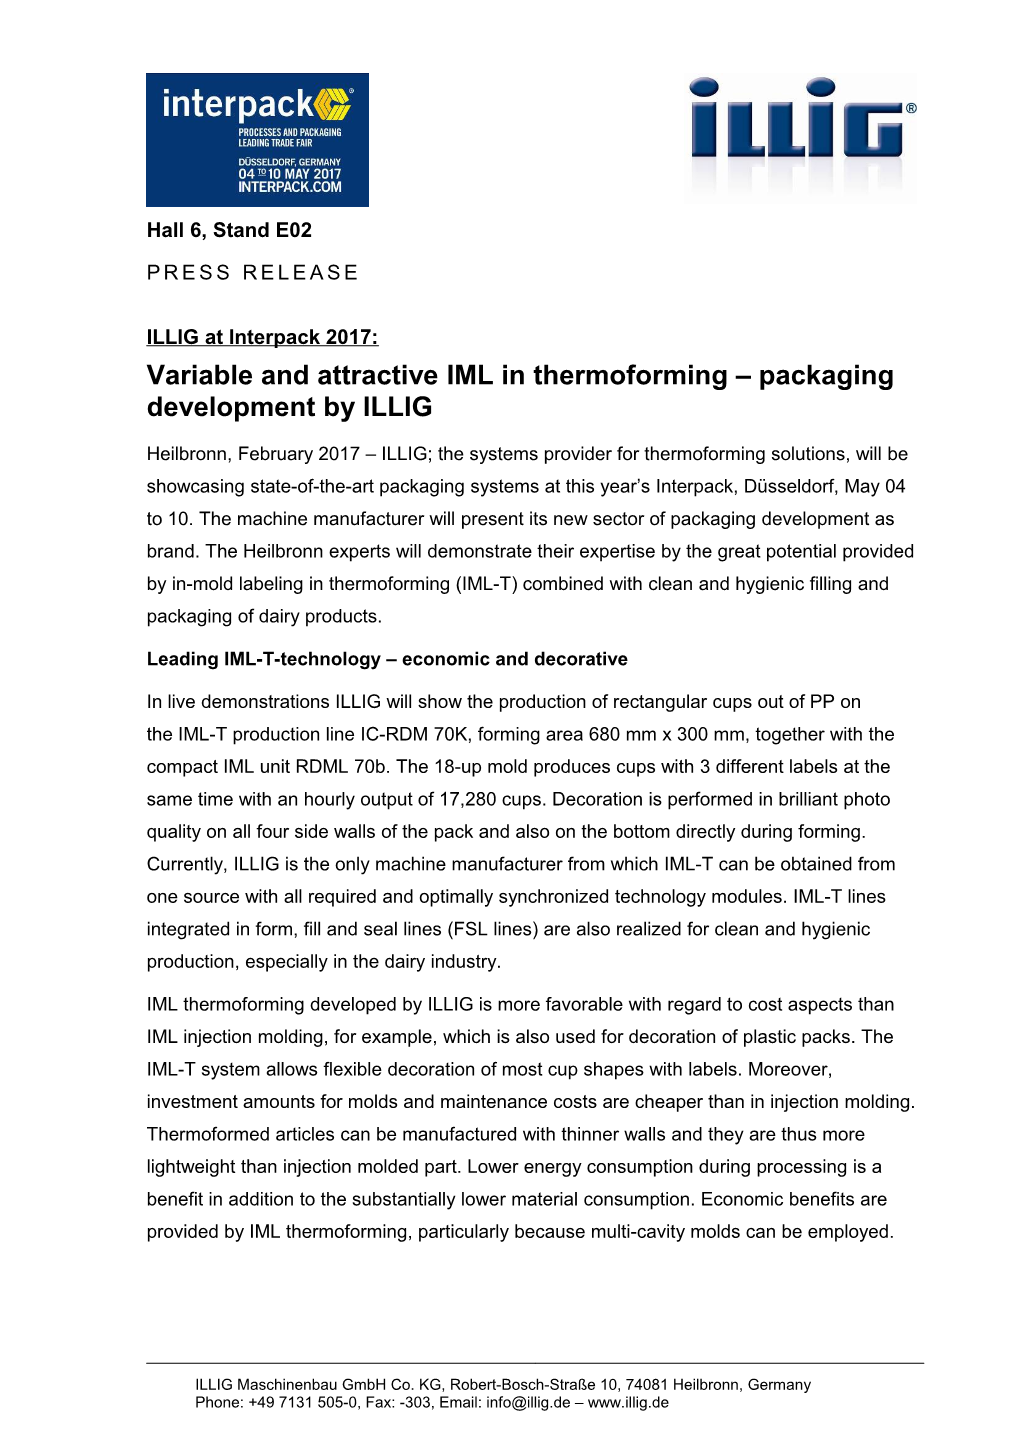 Page1of Press Release: Variable and Attractive IML in Thermoforming Packaging Development